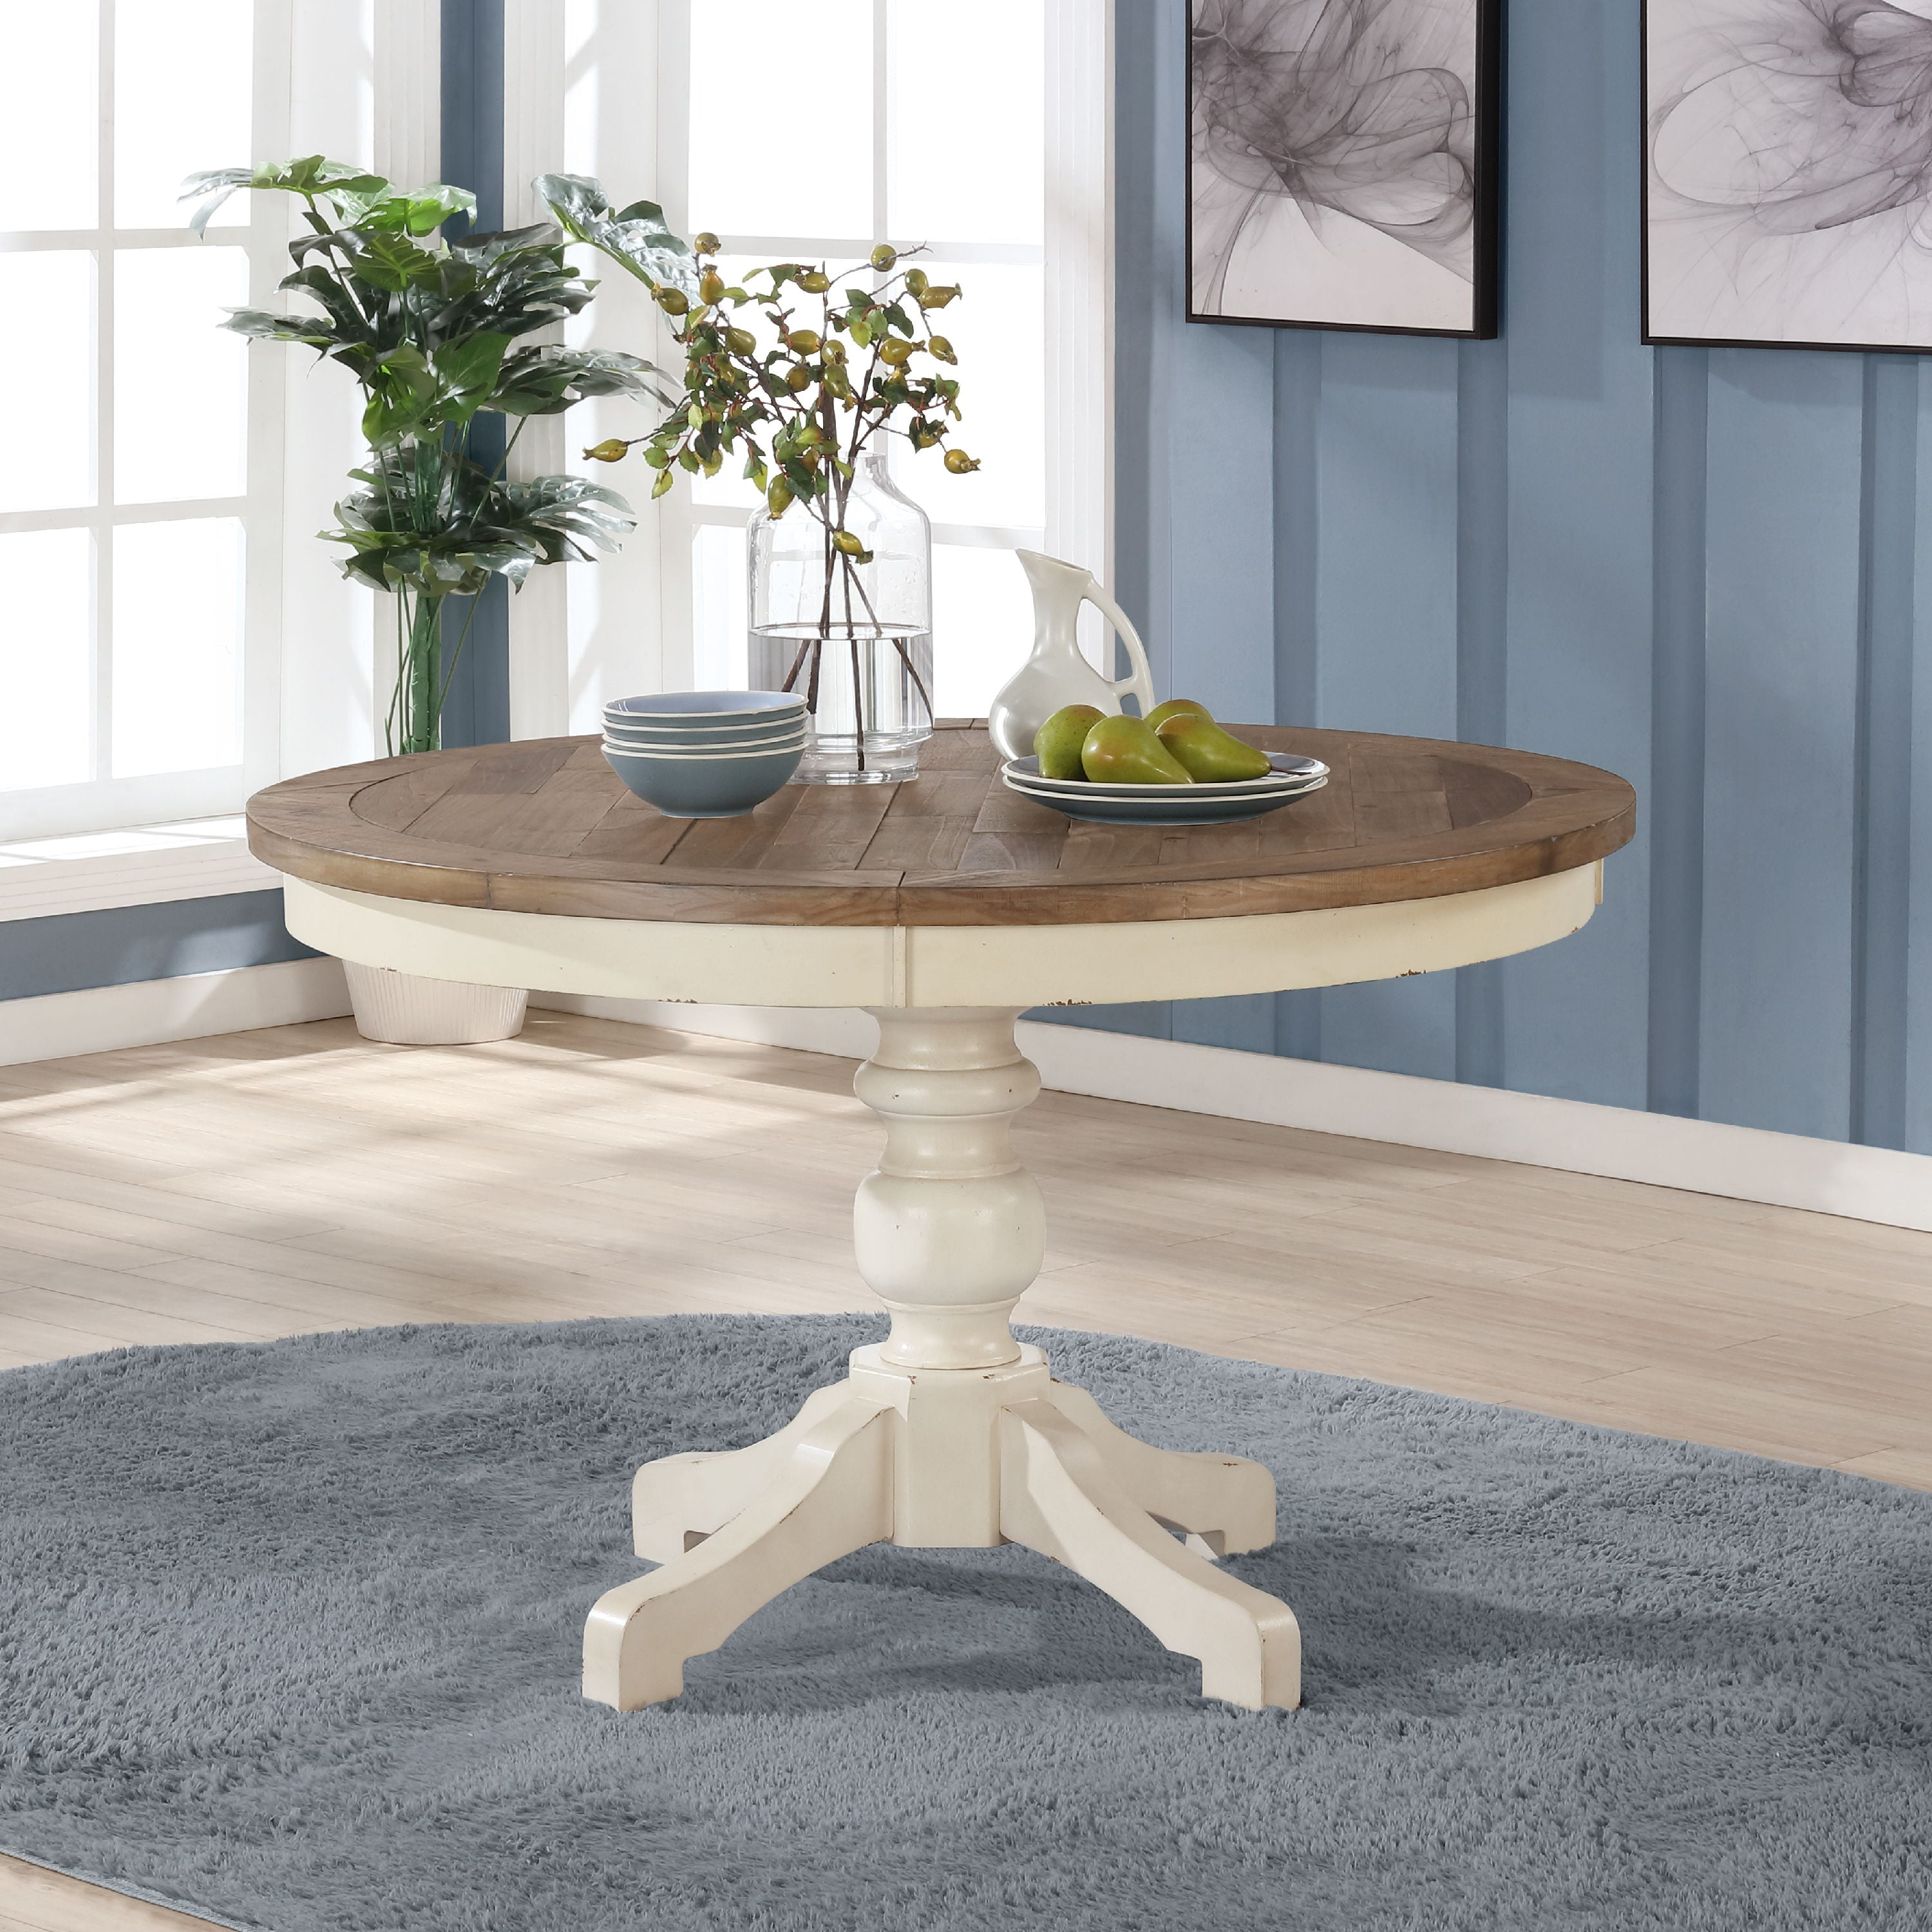 Prato Round Antique White and Distressed Oak Twotone Finish Wood Dining Table